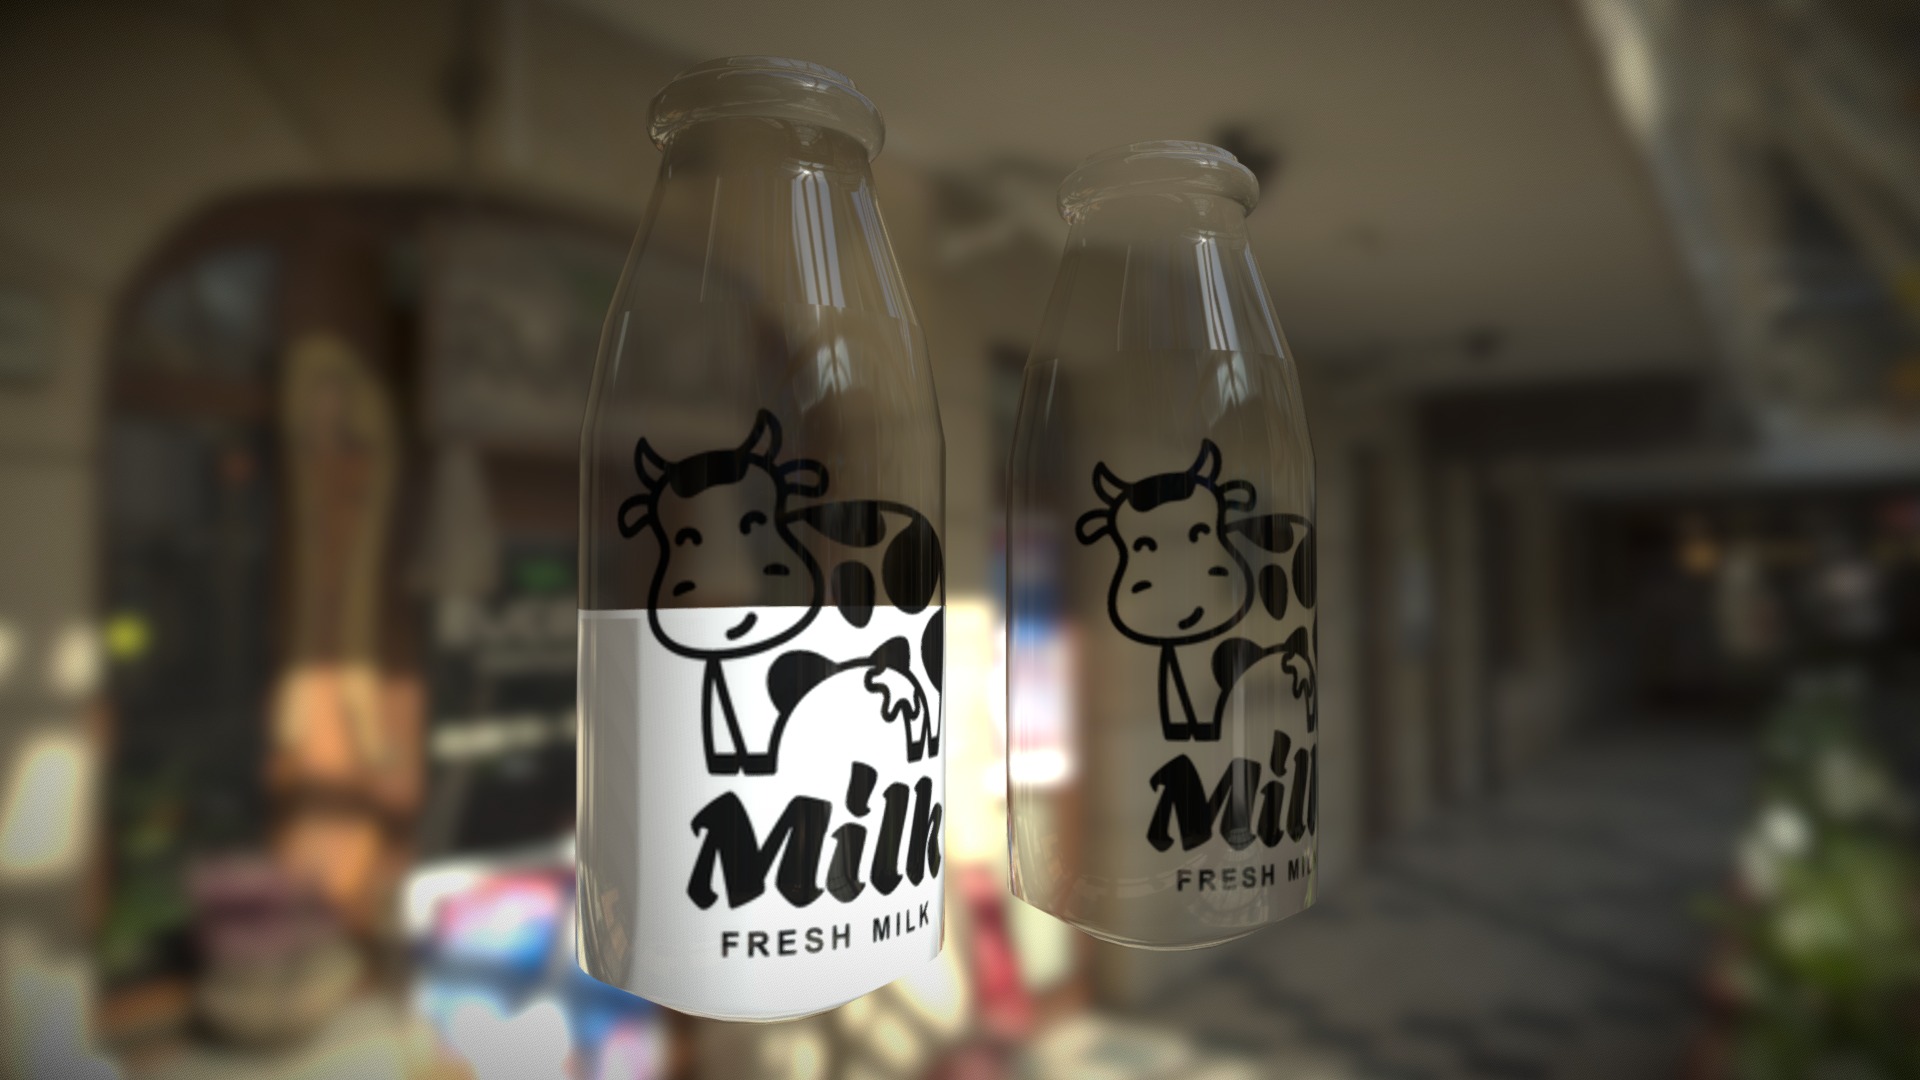 3D model Bottle of milk - This is a 3D model of the Bottle of milk. The 3D model is about a couple of glass bottles with a cartoon character on them.